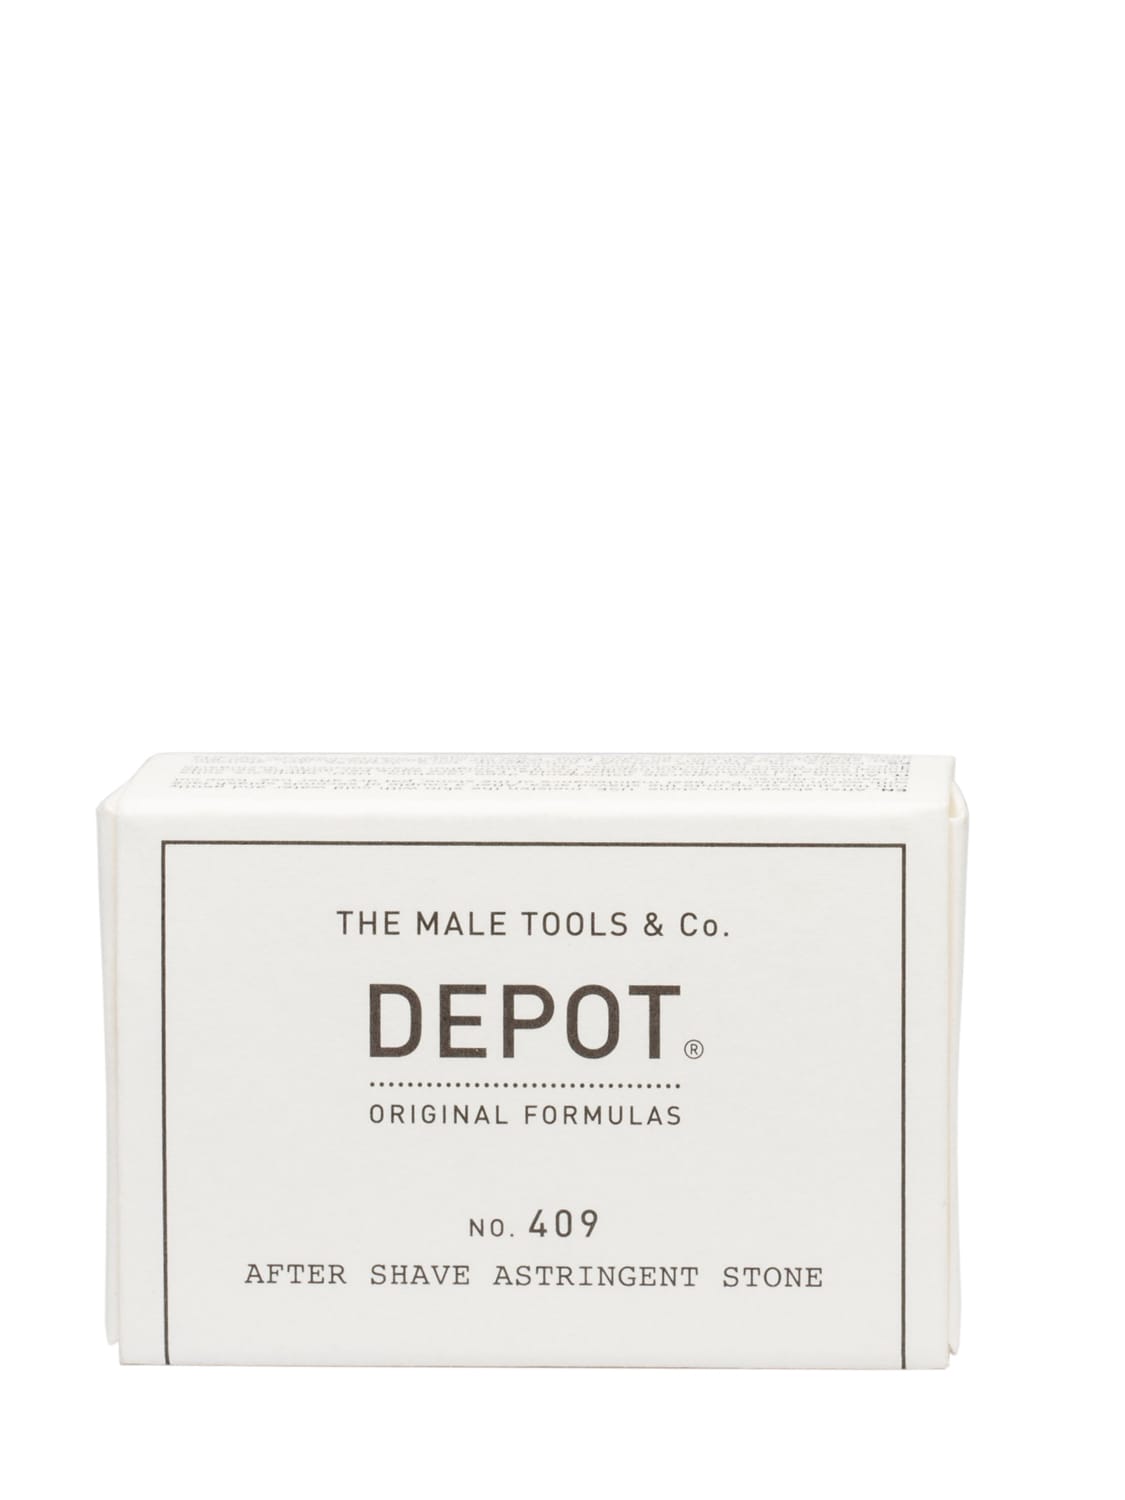 Image of N.409 After Shave Astringent Stone